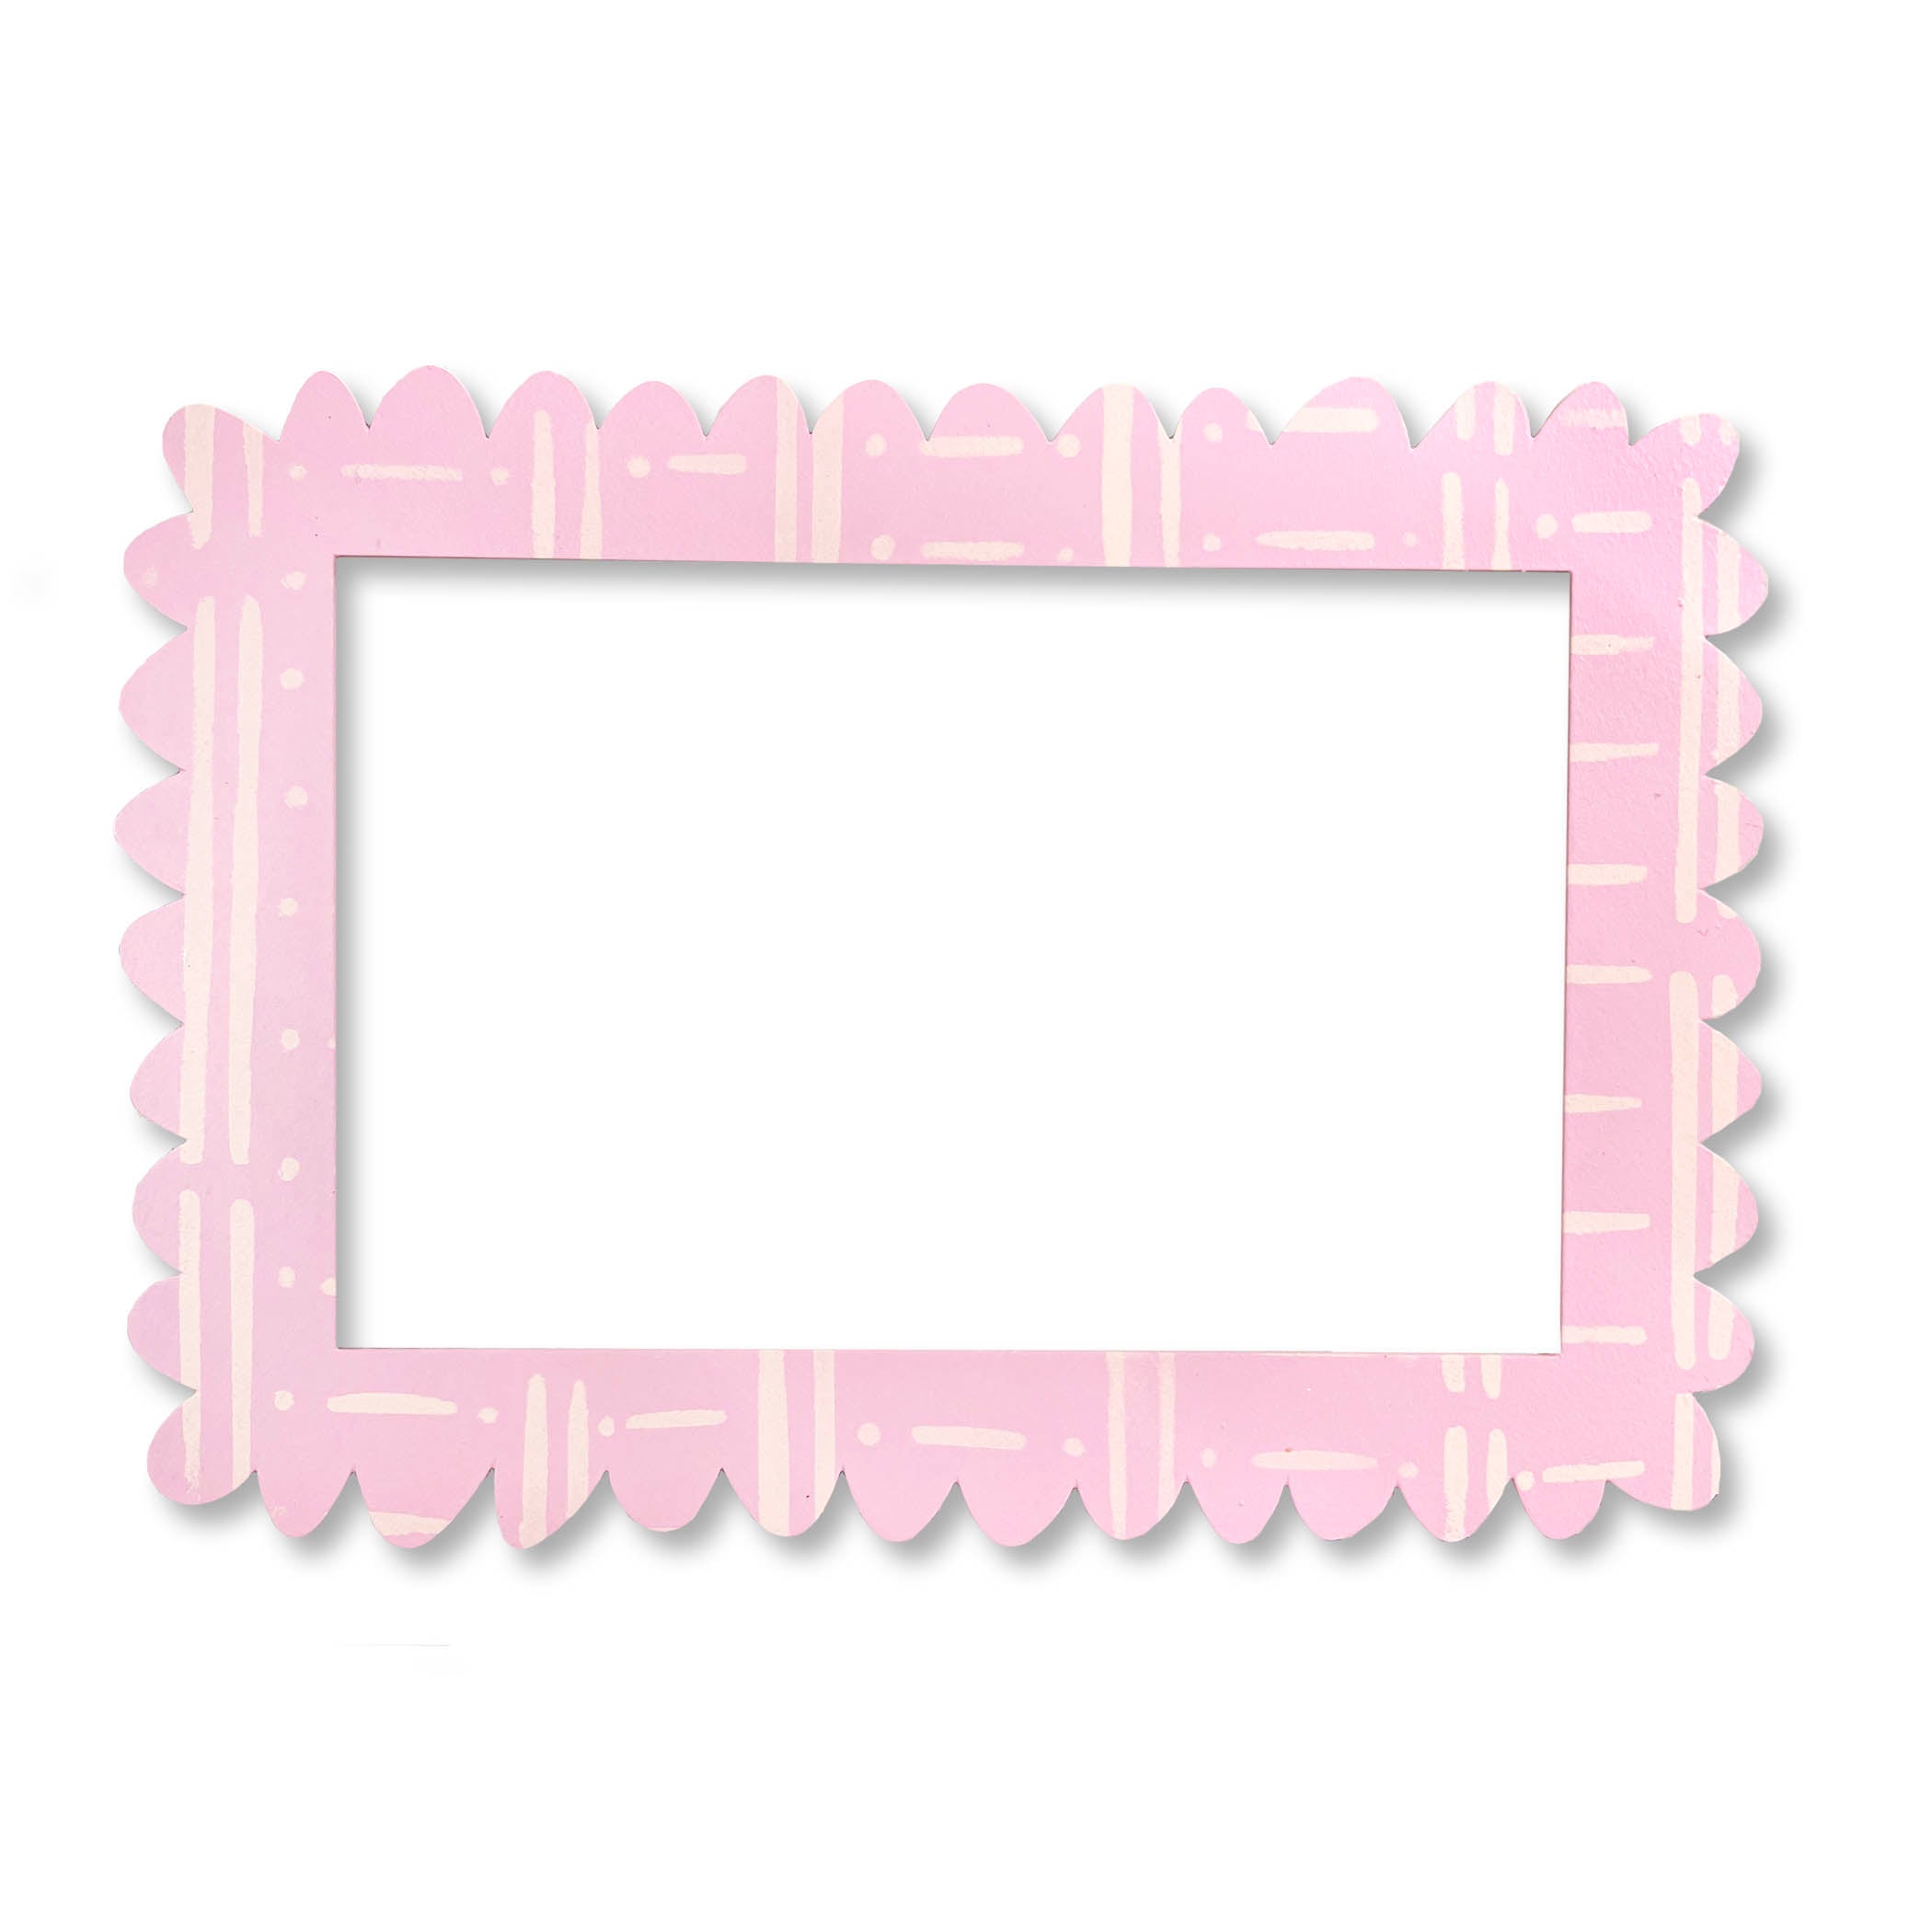 5x7 Scalloped Frame - Patterned